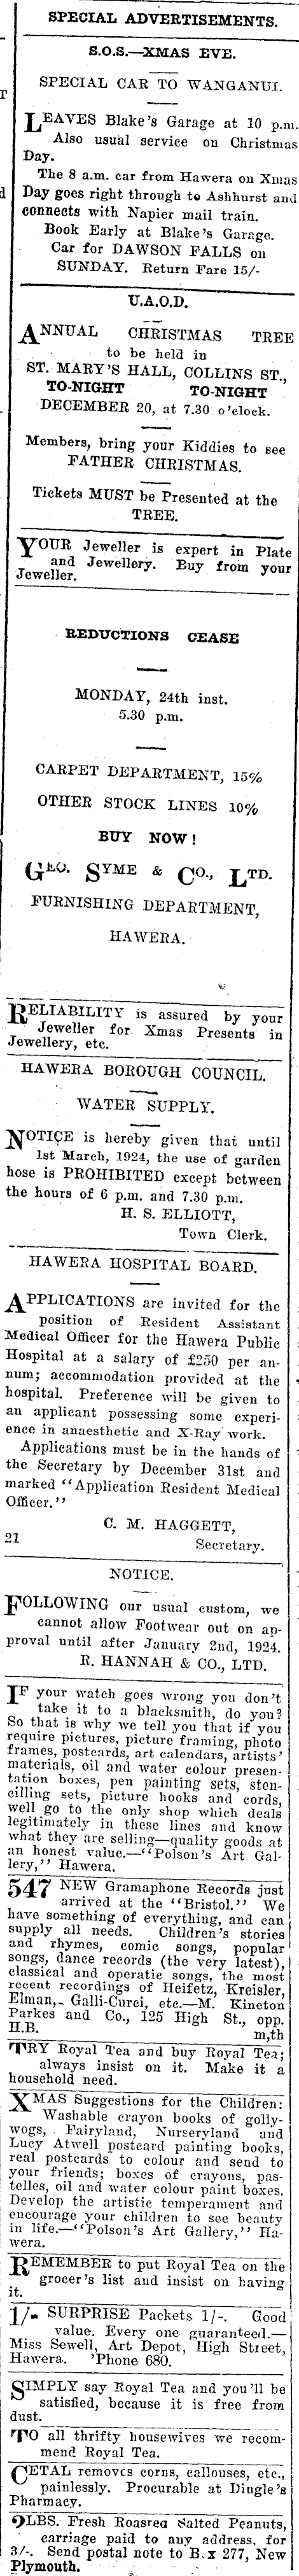 Papers Past Newspapers Hawera Normanby Star December 1923 Page 1 Advertisements Column 5